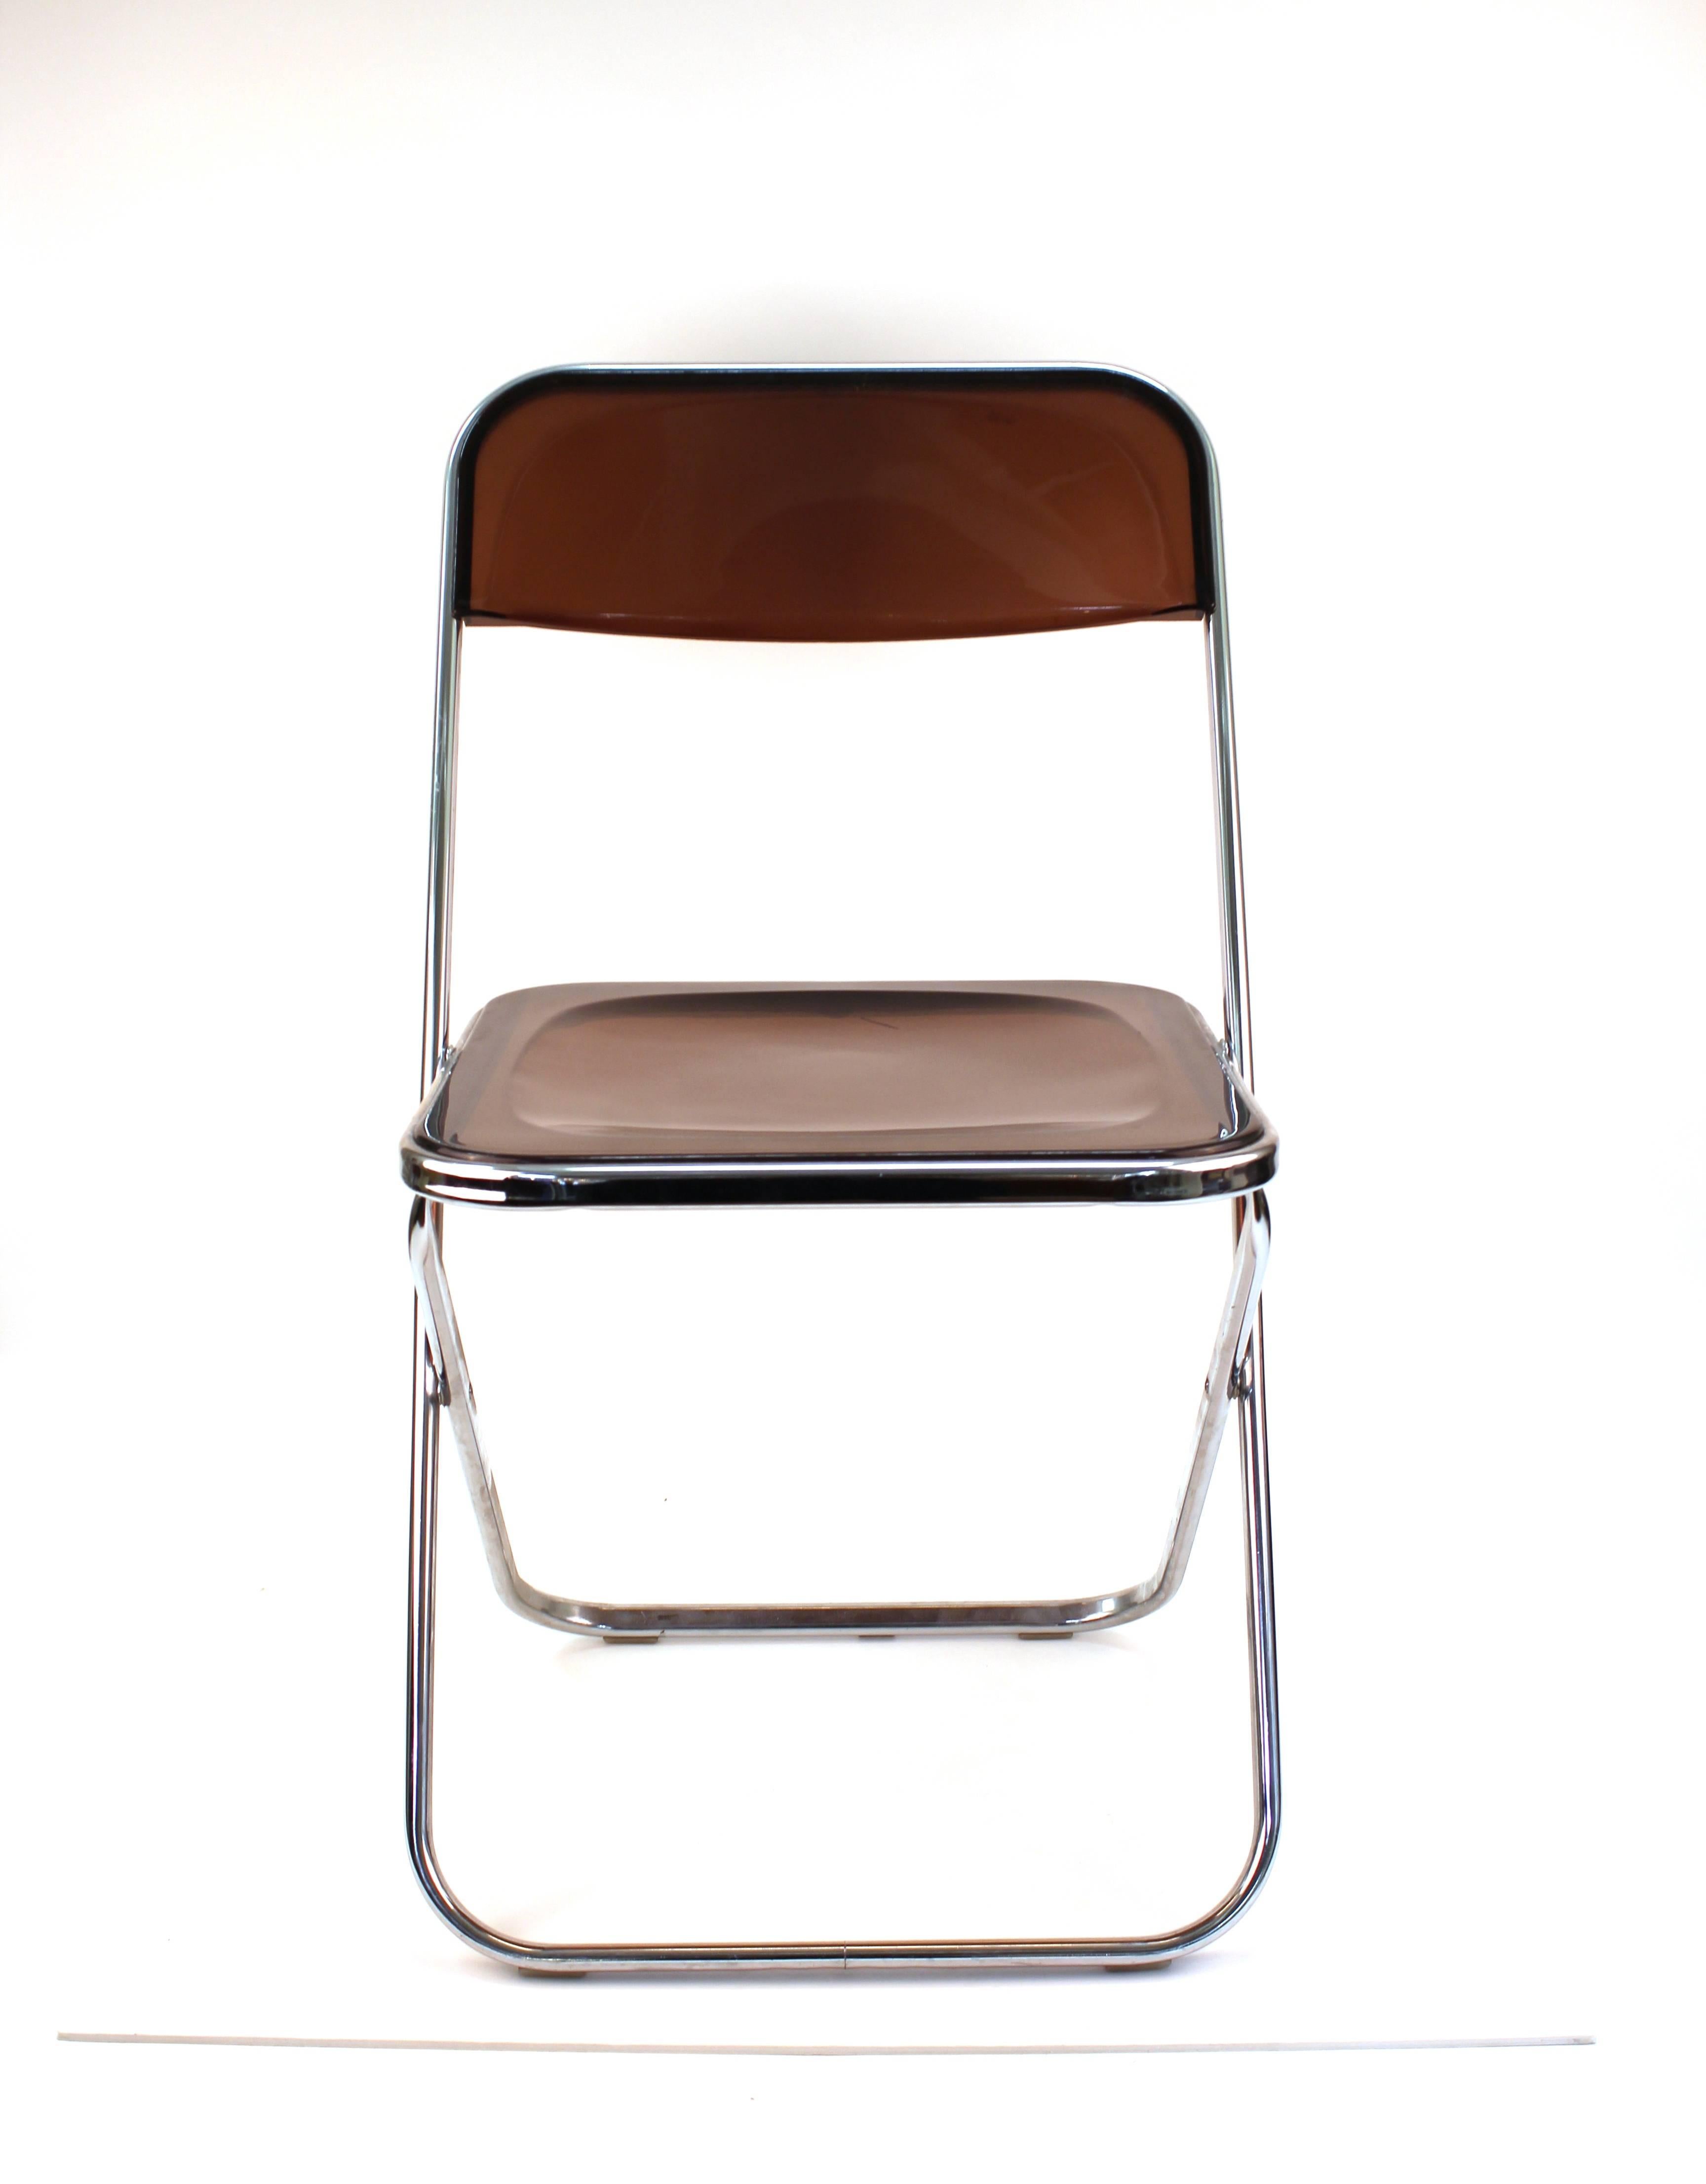 Giancarlo Piretti 'Plia' style folding chairs set of four, in smoked Lucite. The set was made in Italy in the 1970s and is in good vintage condition with age appropriate wear to the Lucite.